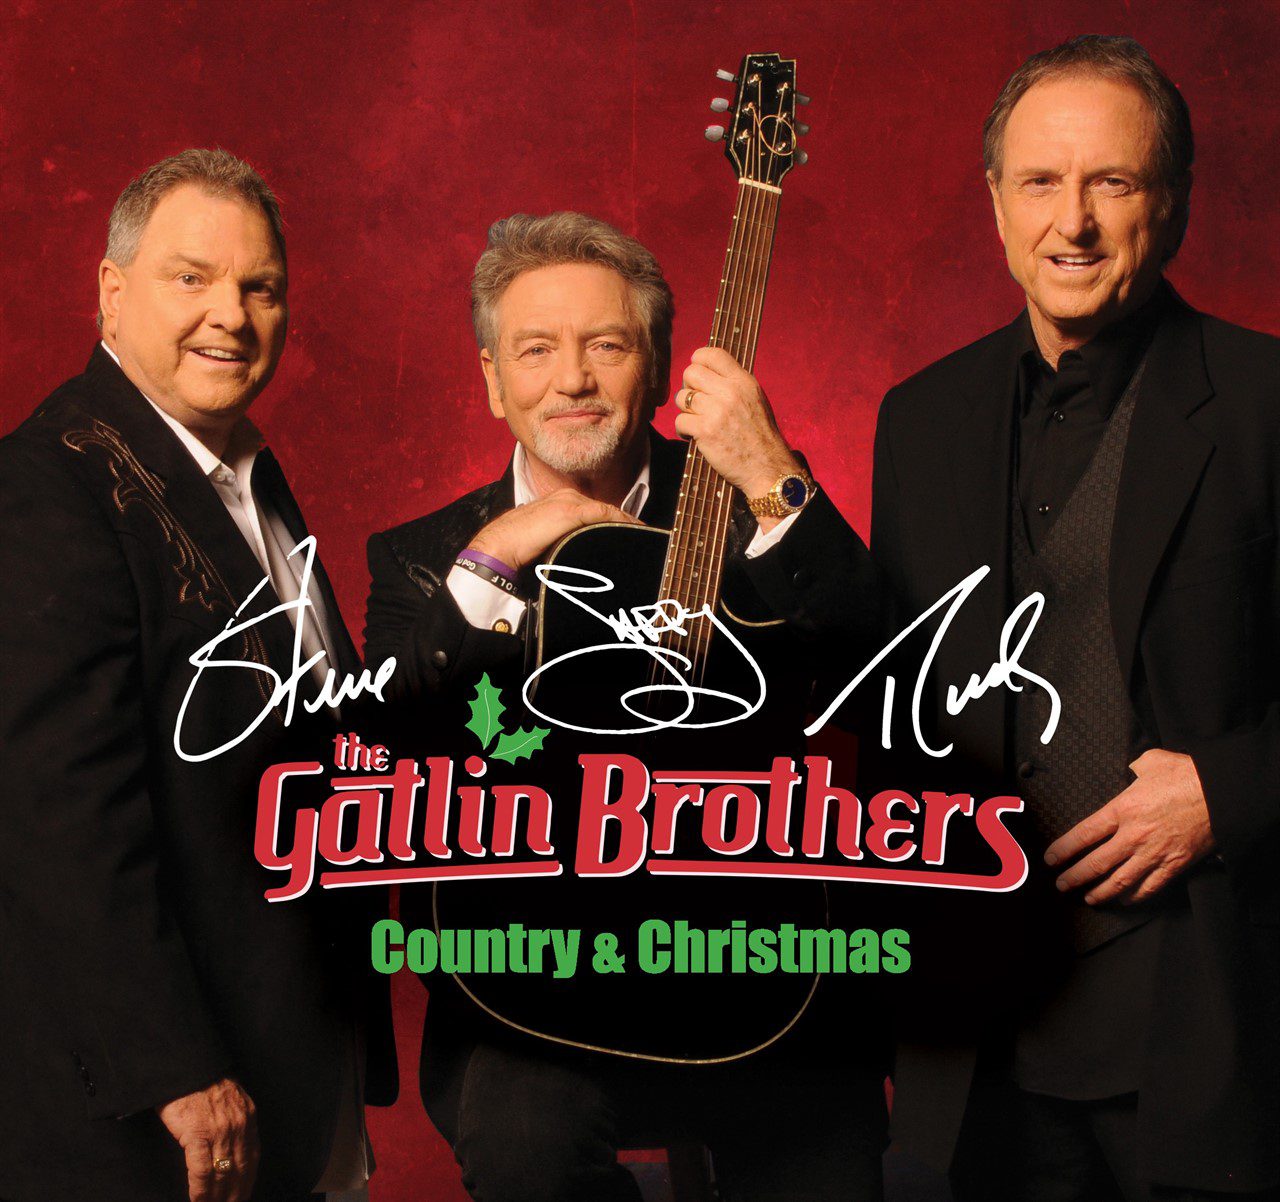 Gatlin Brothers Country & Christmas performing in downtown Franklin, Tennessee at The Franklin Theatre.